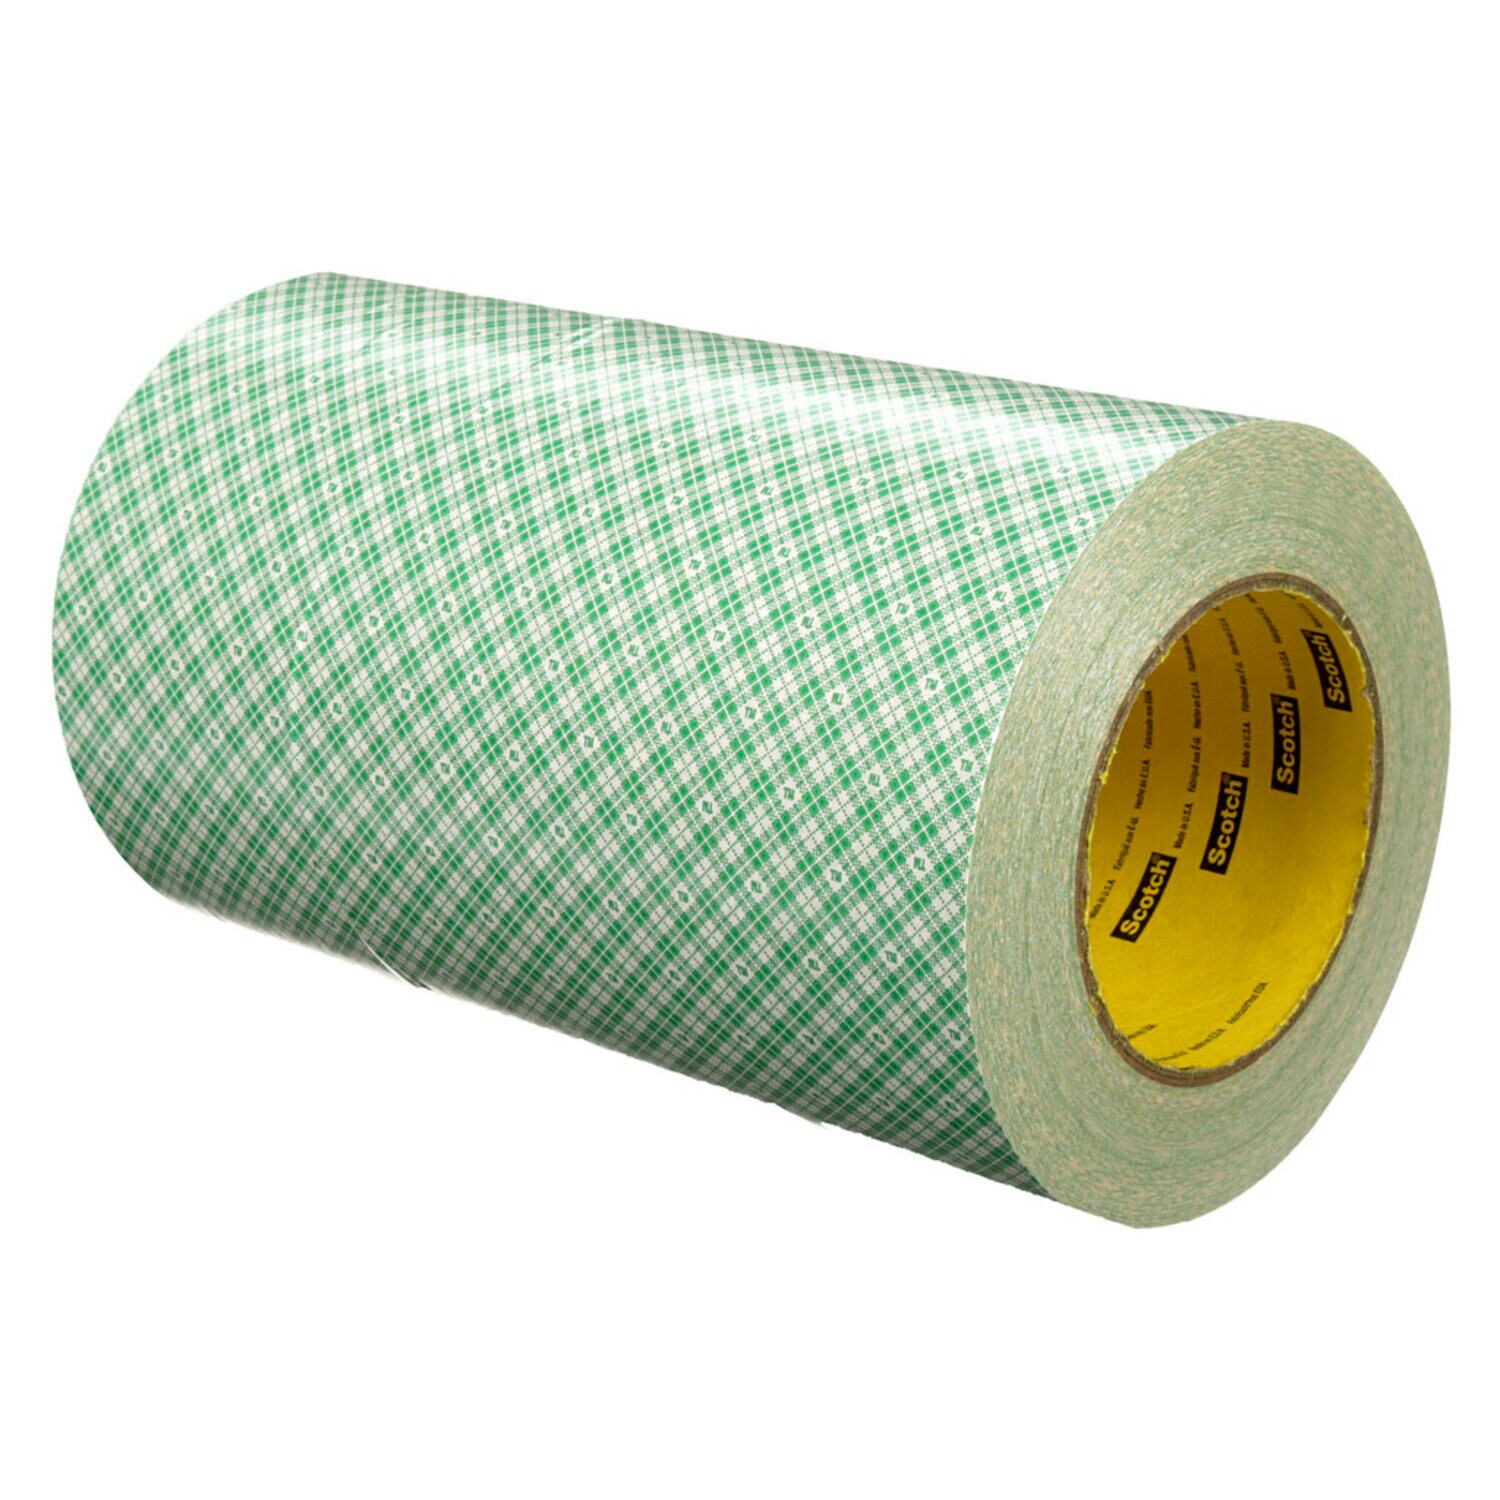 7000049327 - 3M Double Coated Paper Tape 410M, Natural, 8 in x 36 yd, 5 mil, 4 rolls
per case